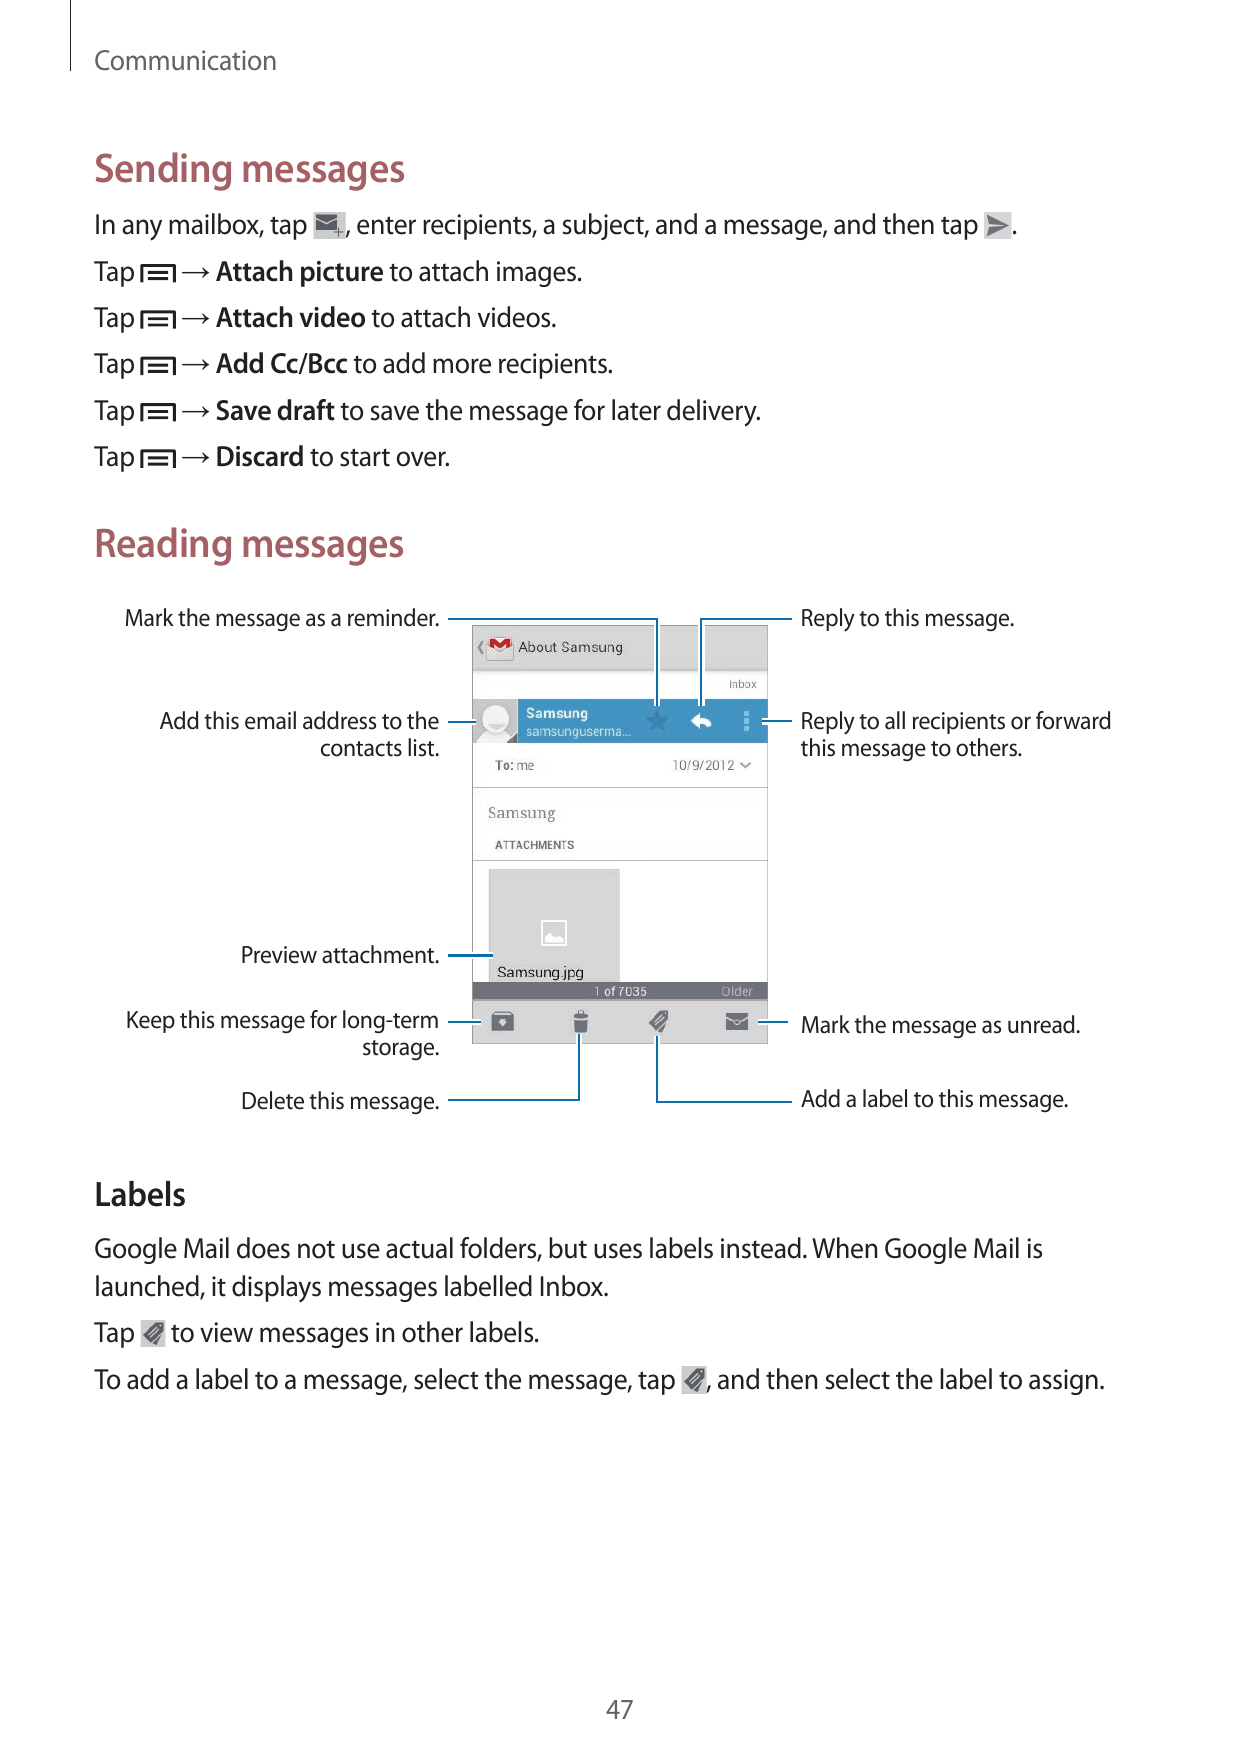 CommunicationSending messagesIn any mailbox, tap, enter recipients, a subject, and a message, and then tapTap→ Attach picture to